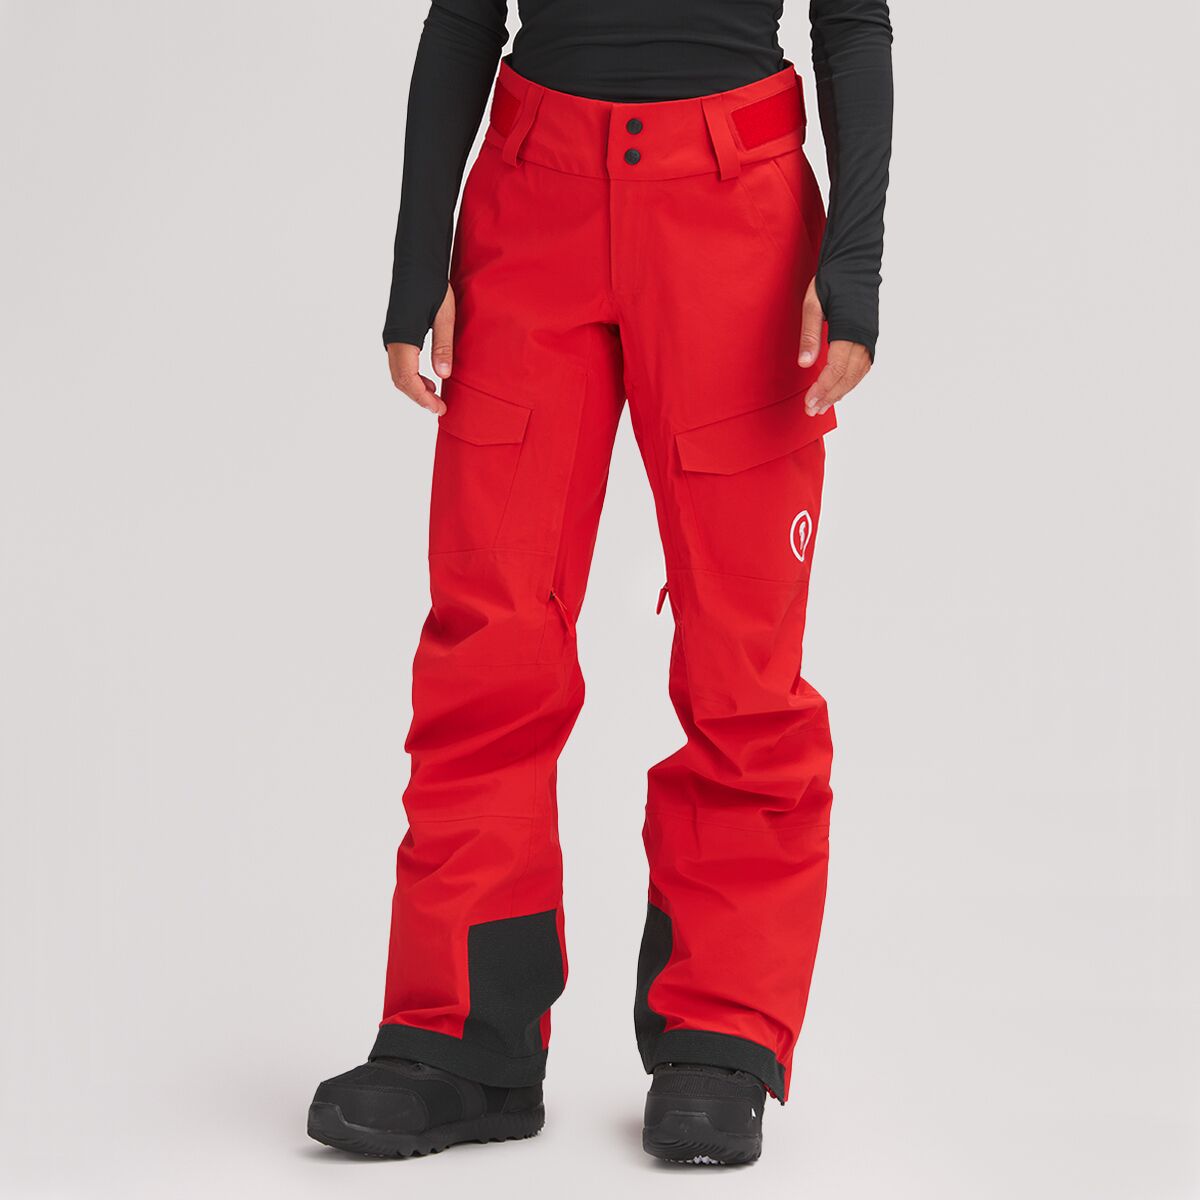 Backcountry Last Chair Stretch Shell Pant - Women's